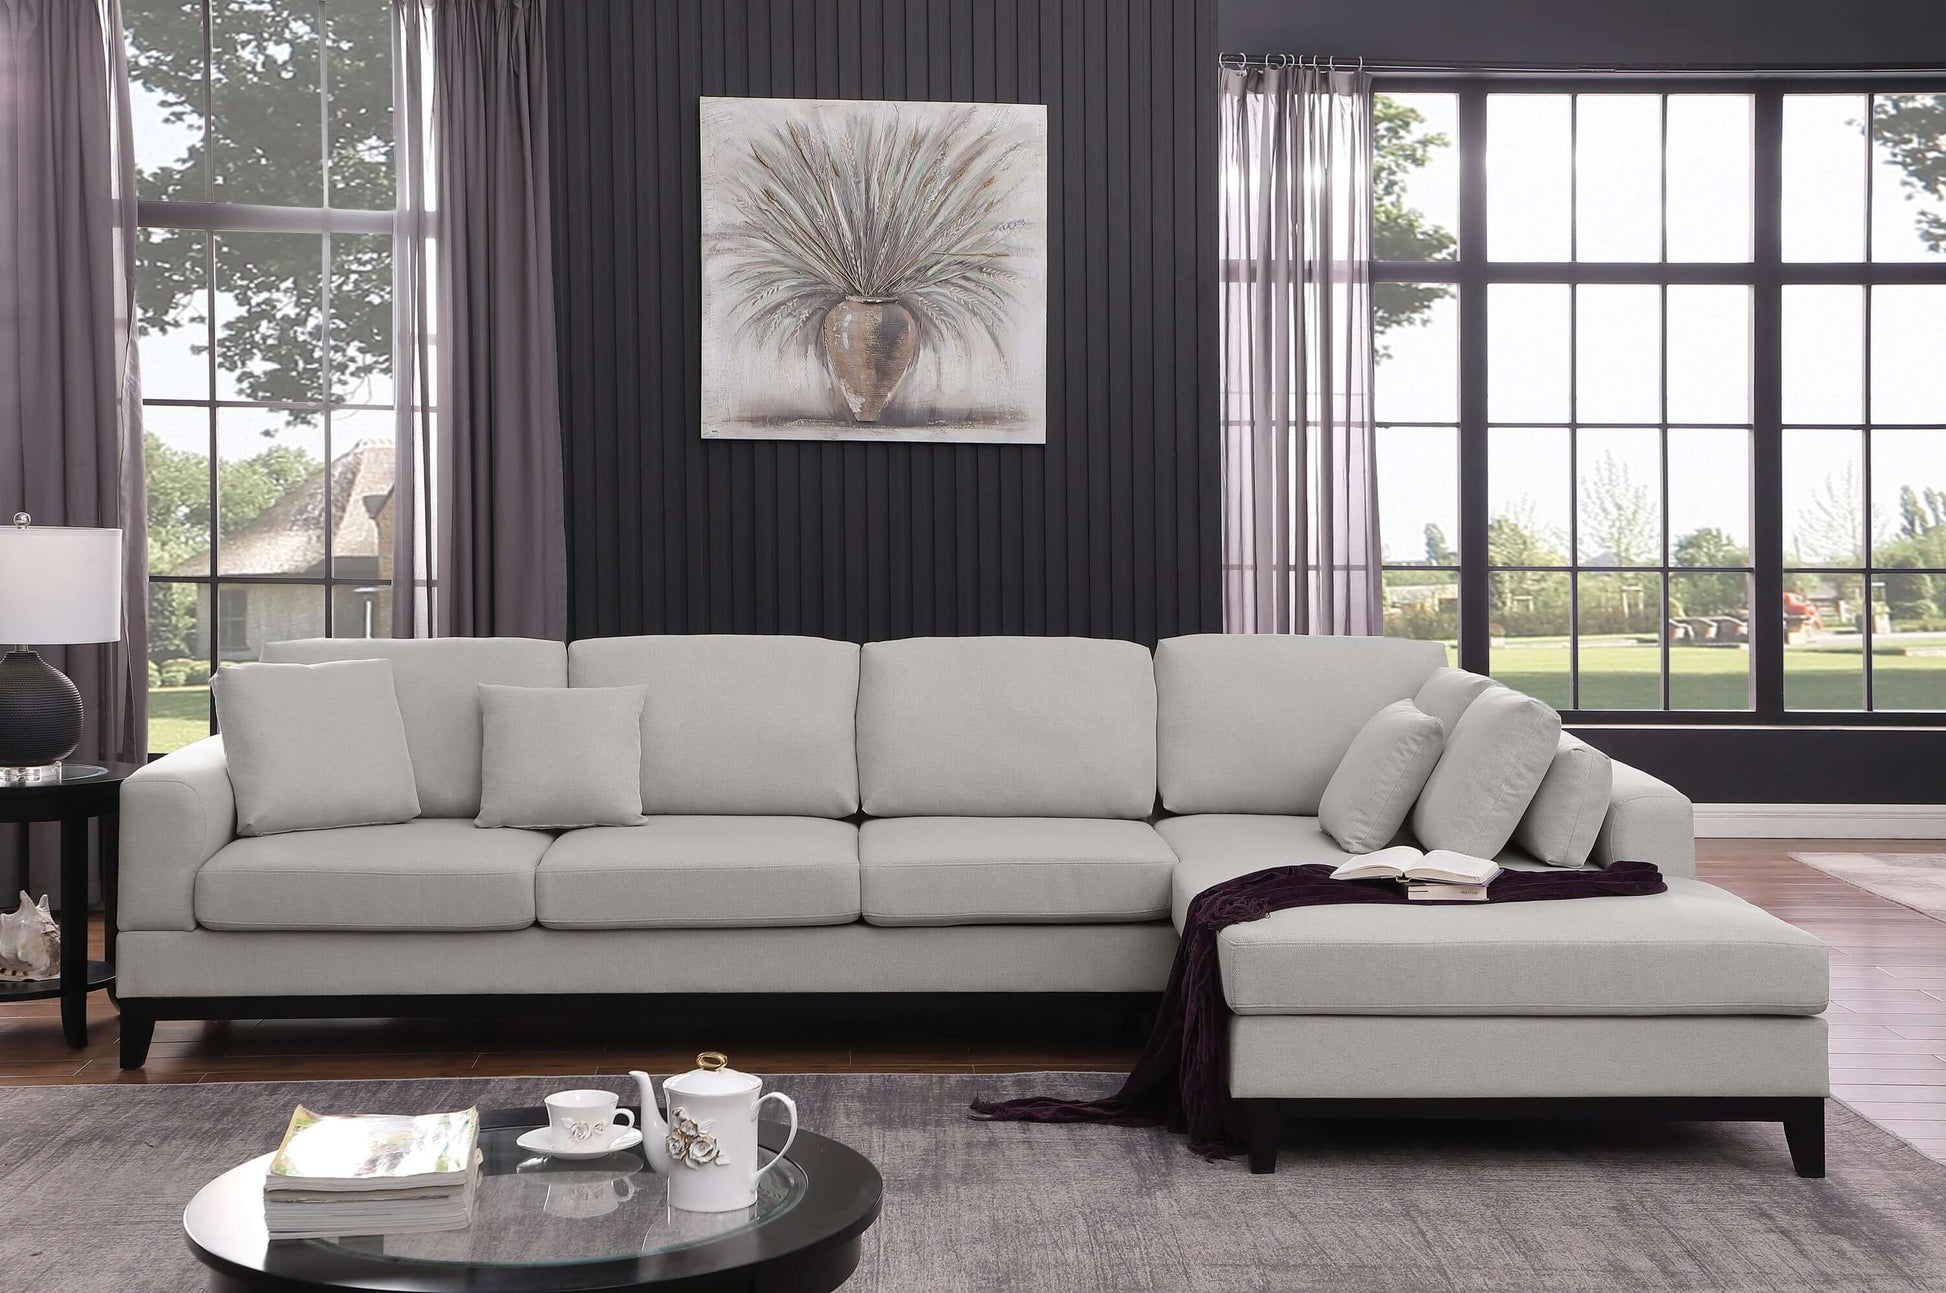 Redford MCM Light Gray Linen Fabric Sectional Sofa with Right Facing Chaise - Revel Sofa 